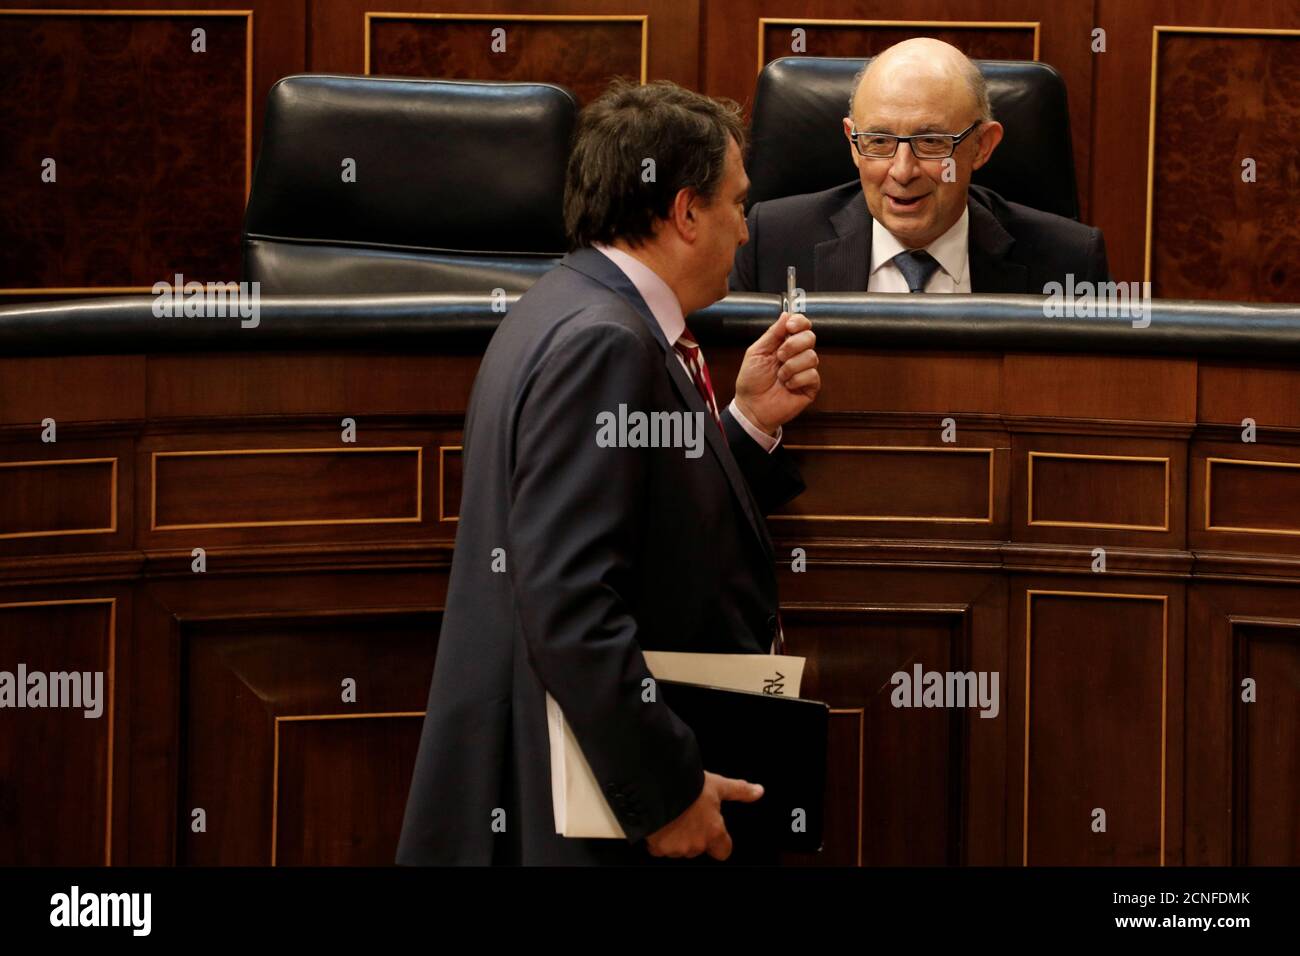 Spain's Treasury Minister Cristobal Montoro talks to Aitor Esteban, spokesman of Basque Nationalist Party (PNV), during a 2018 budget plenary session at Parliament in Madrid, Spain, May 23, 2018. REUTERS/Paul Hanna Stock Photo